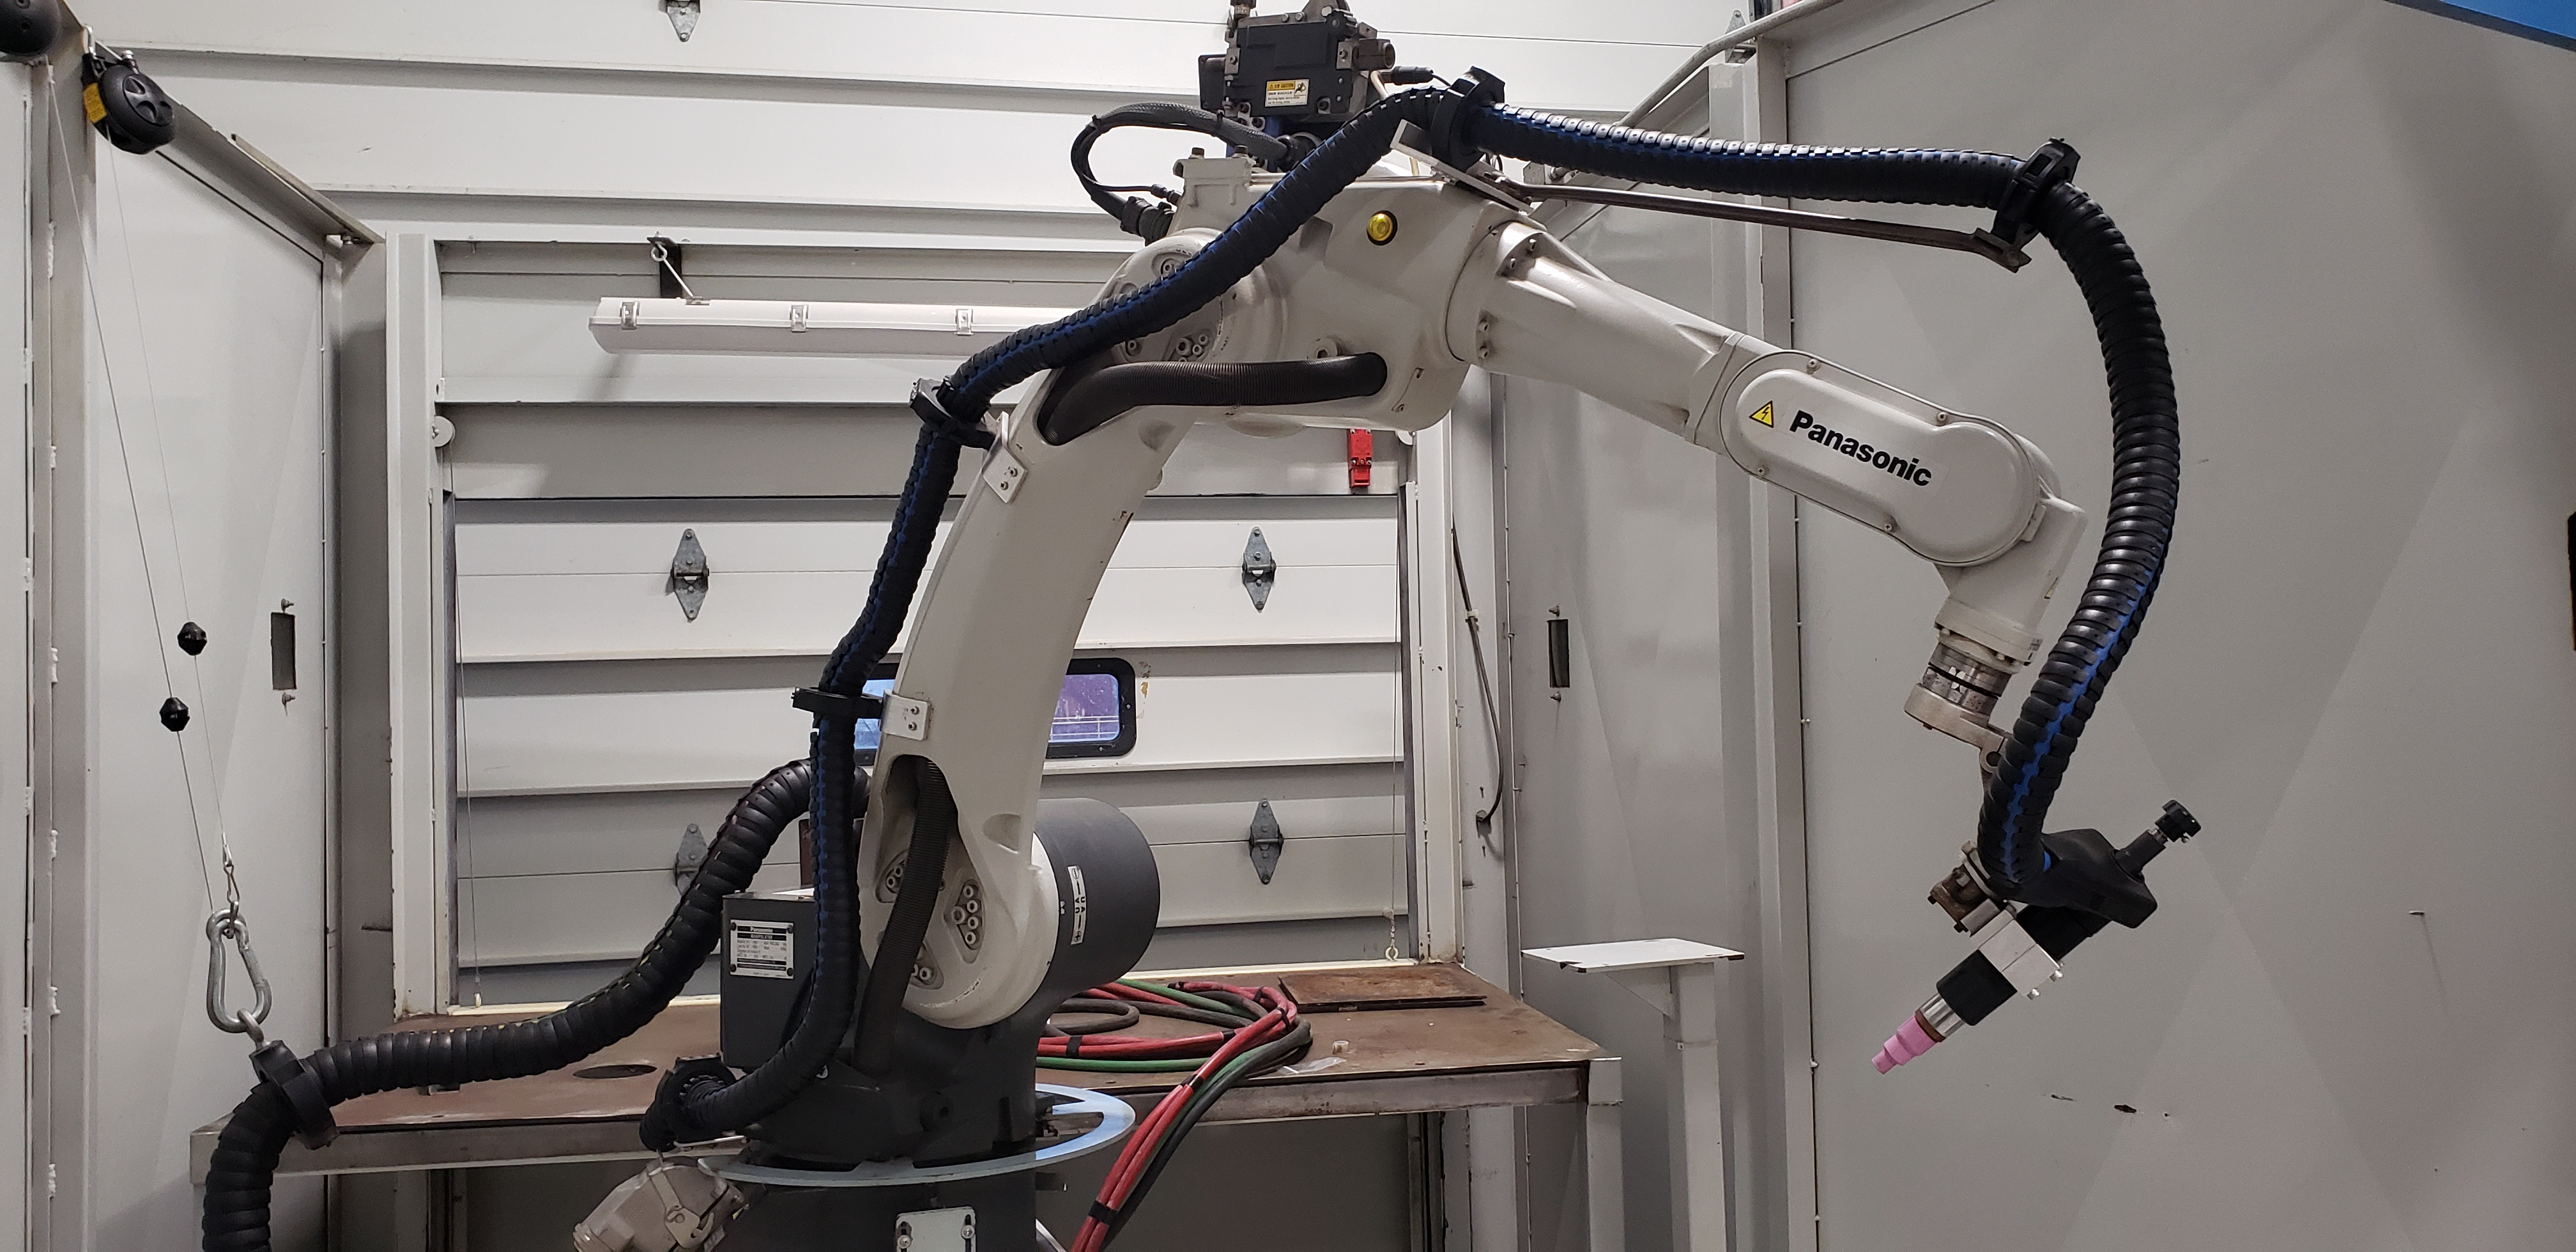 PANASONIC TA-1600 Robotic Welding Arm with ARS-1602 Welding Cell System